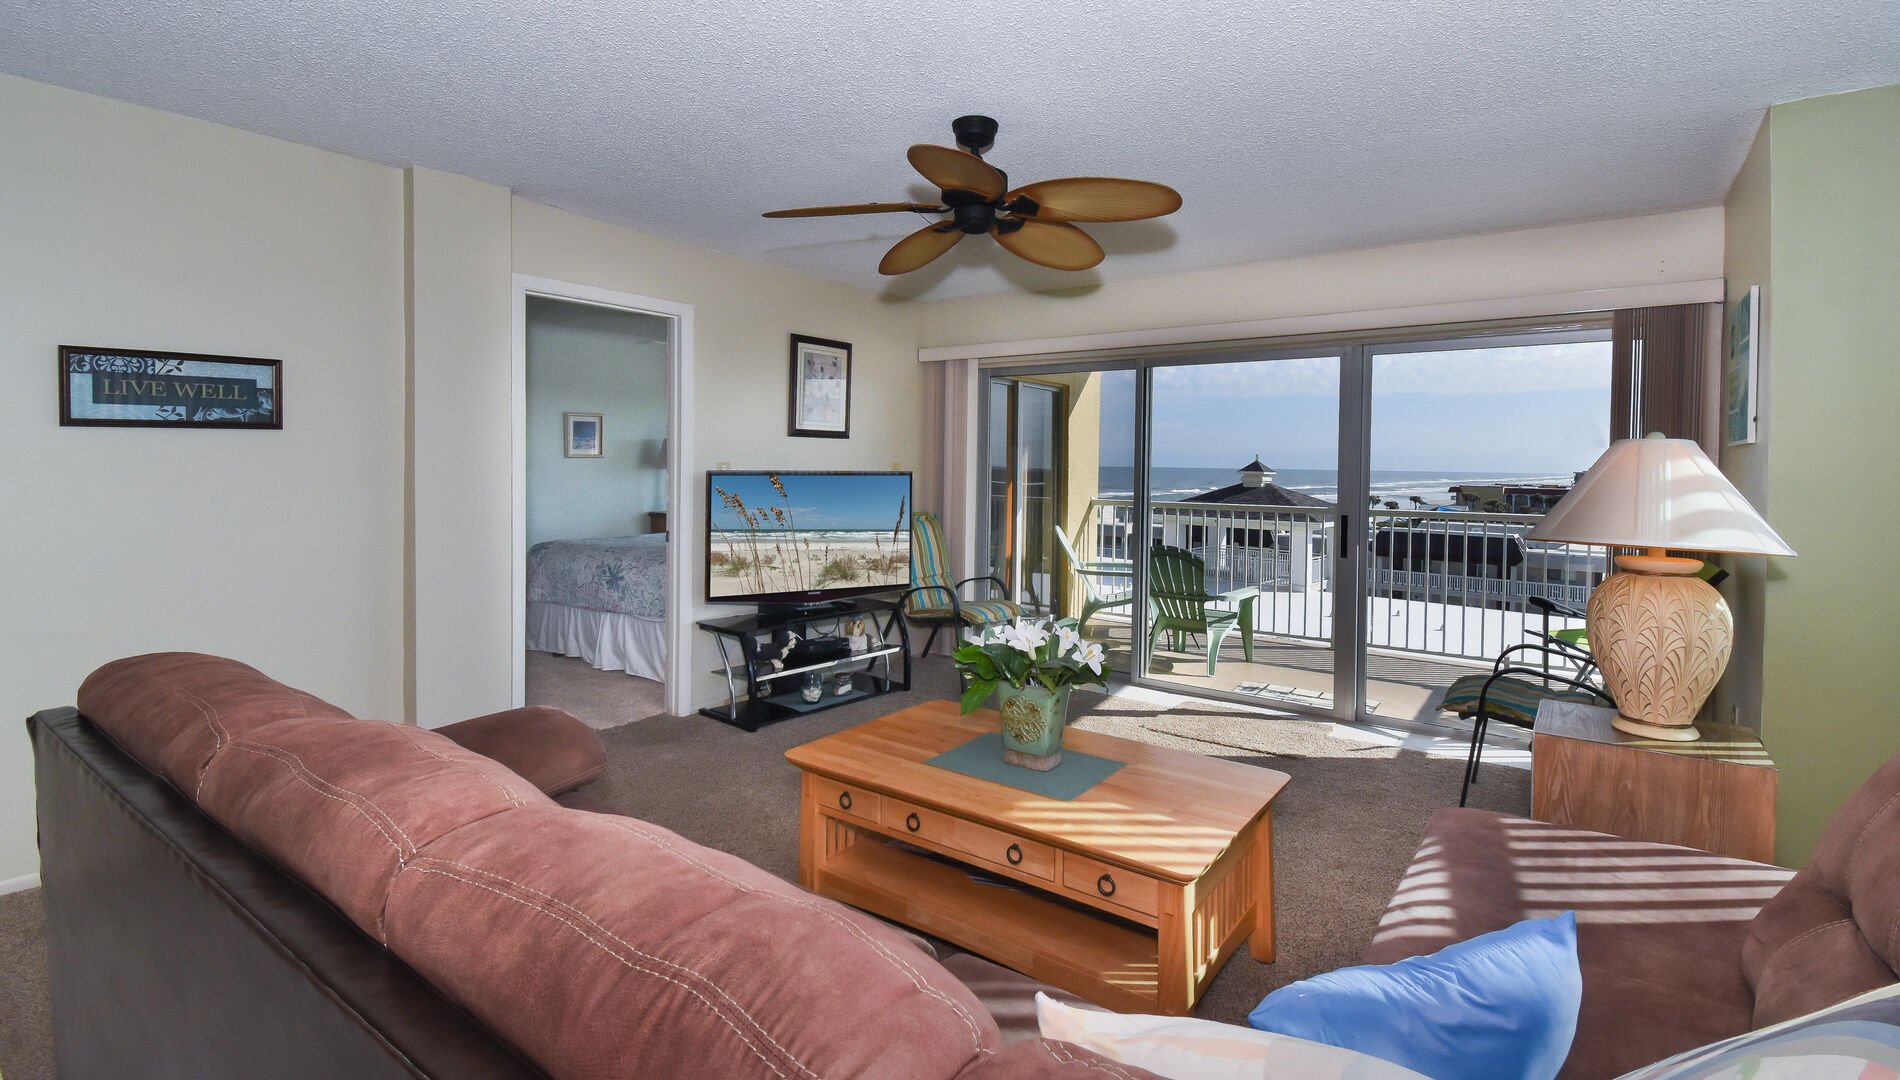 Living area of this private condo in New Smyrna Beach, with ample seating, Flat-screen TV, and coffee table.